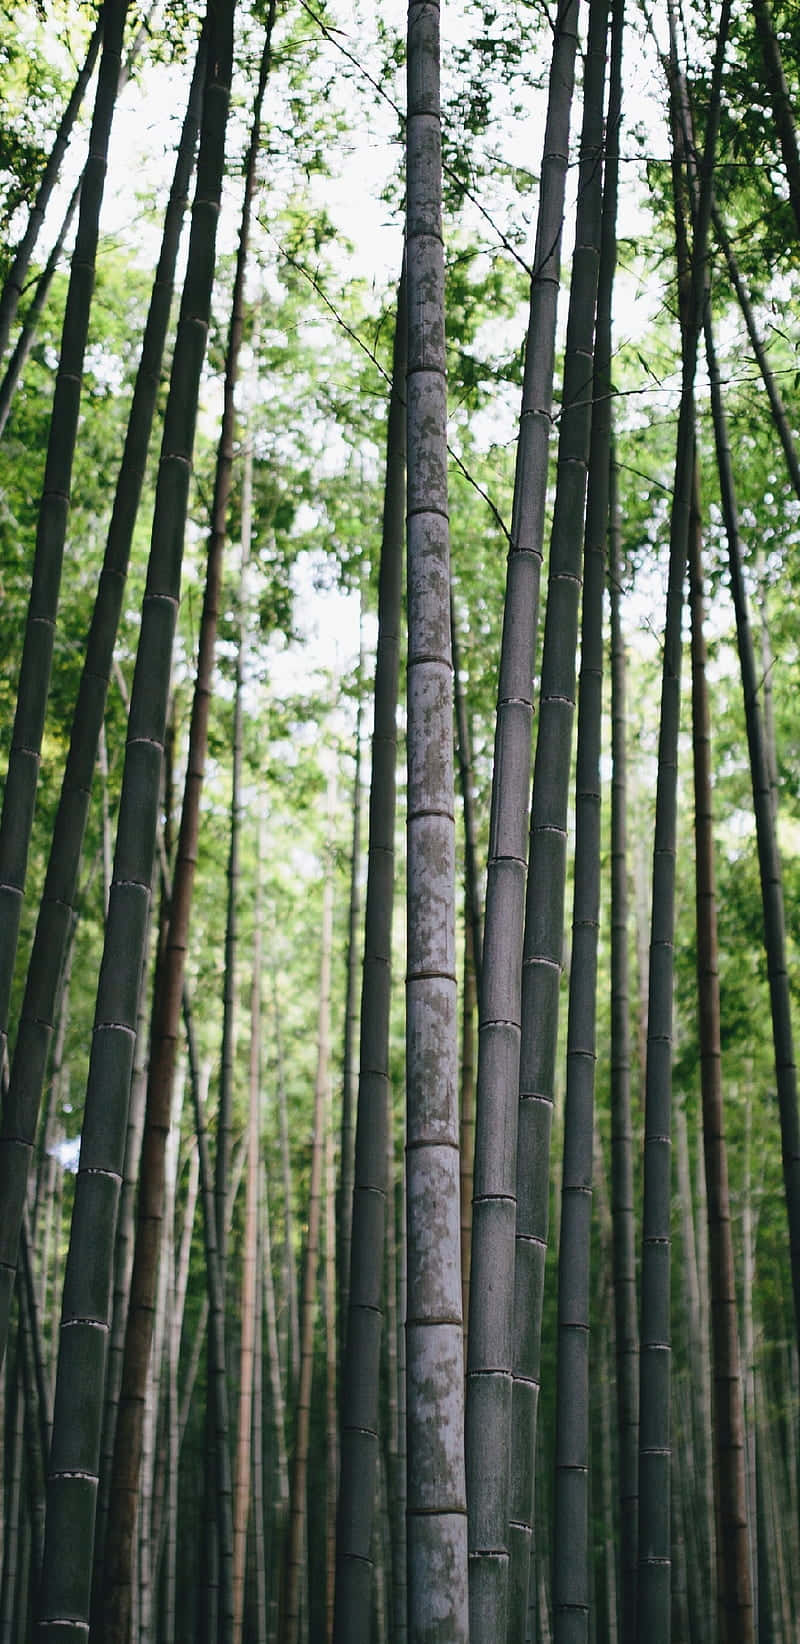 Tall Bamboo Trees In A Forest Wallpaper